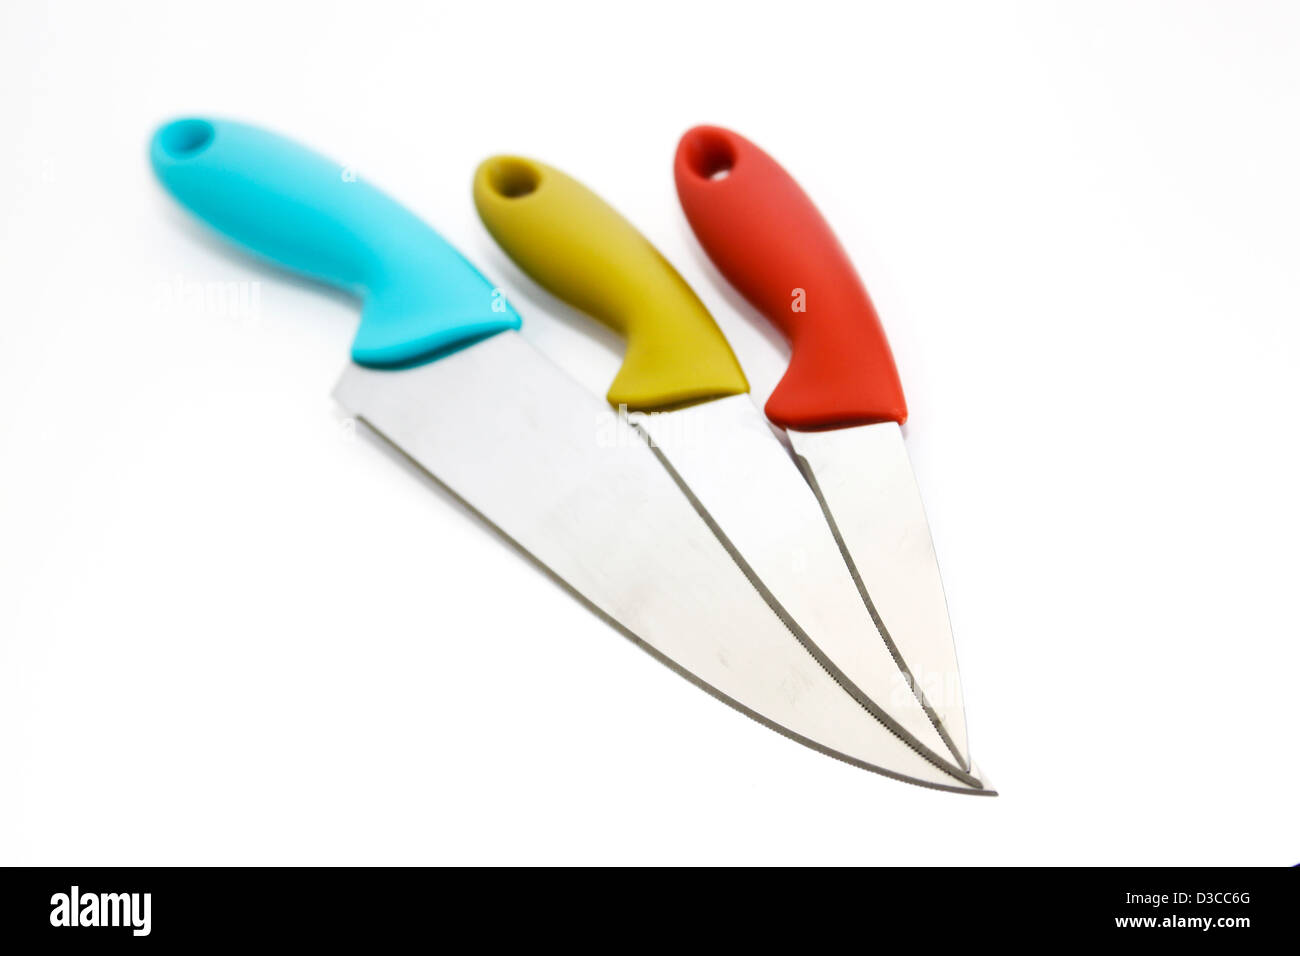 Three kitchen knives with colourful plastic handles Stock Photo